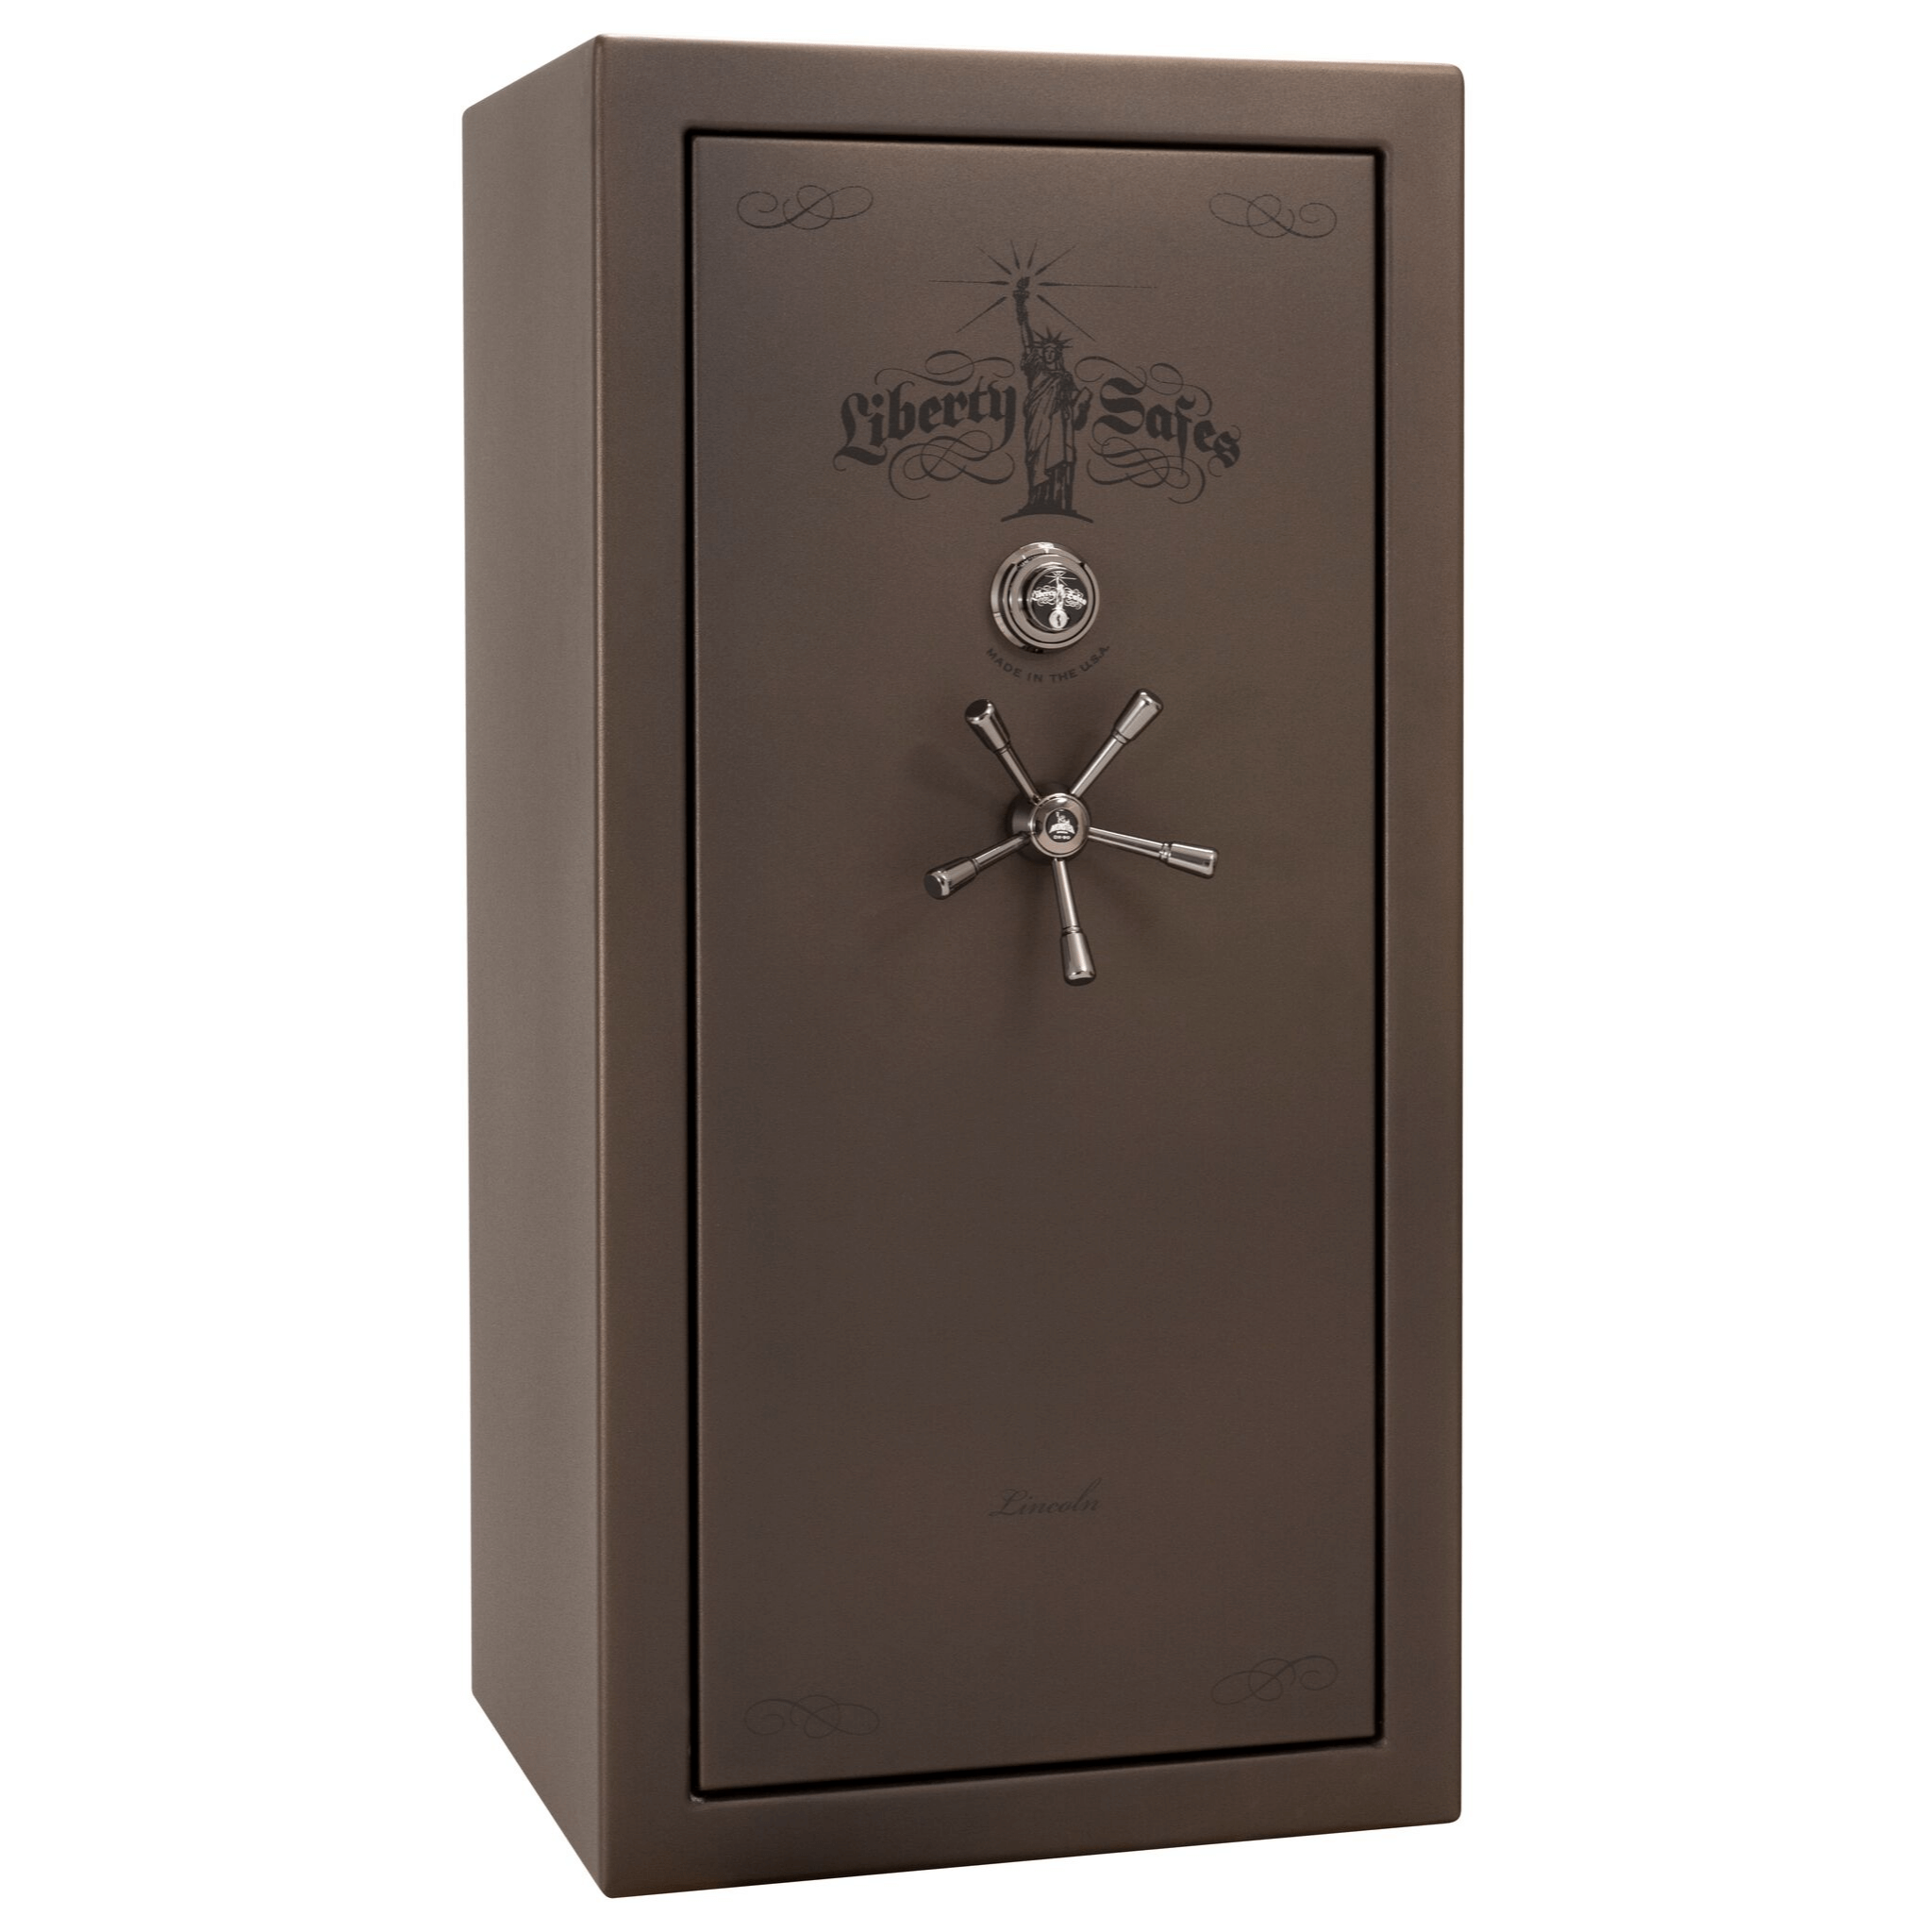 Lincoln Series | Level 5 Security | 110 Minute Fire Protection | 25 | Dimensions: 60.5"(H) x 30"(W) x 28.5"(D) | Granite Textured | Mechanical Lock, photo 7